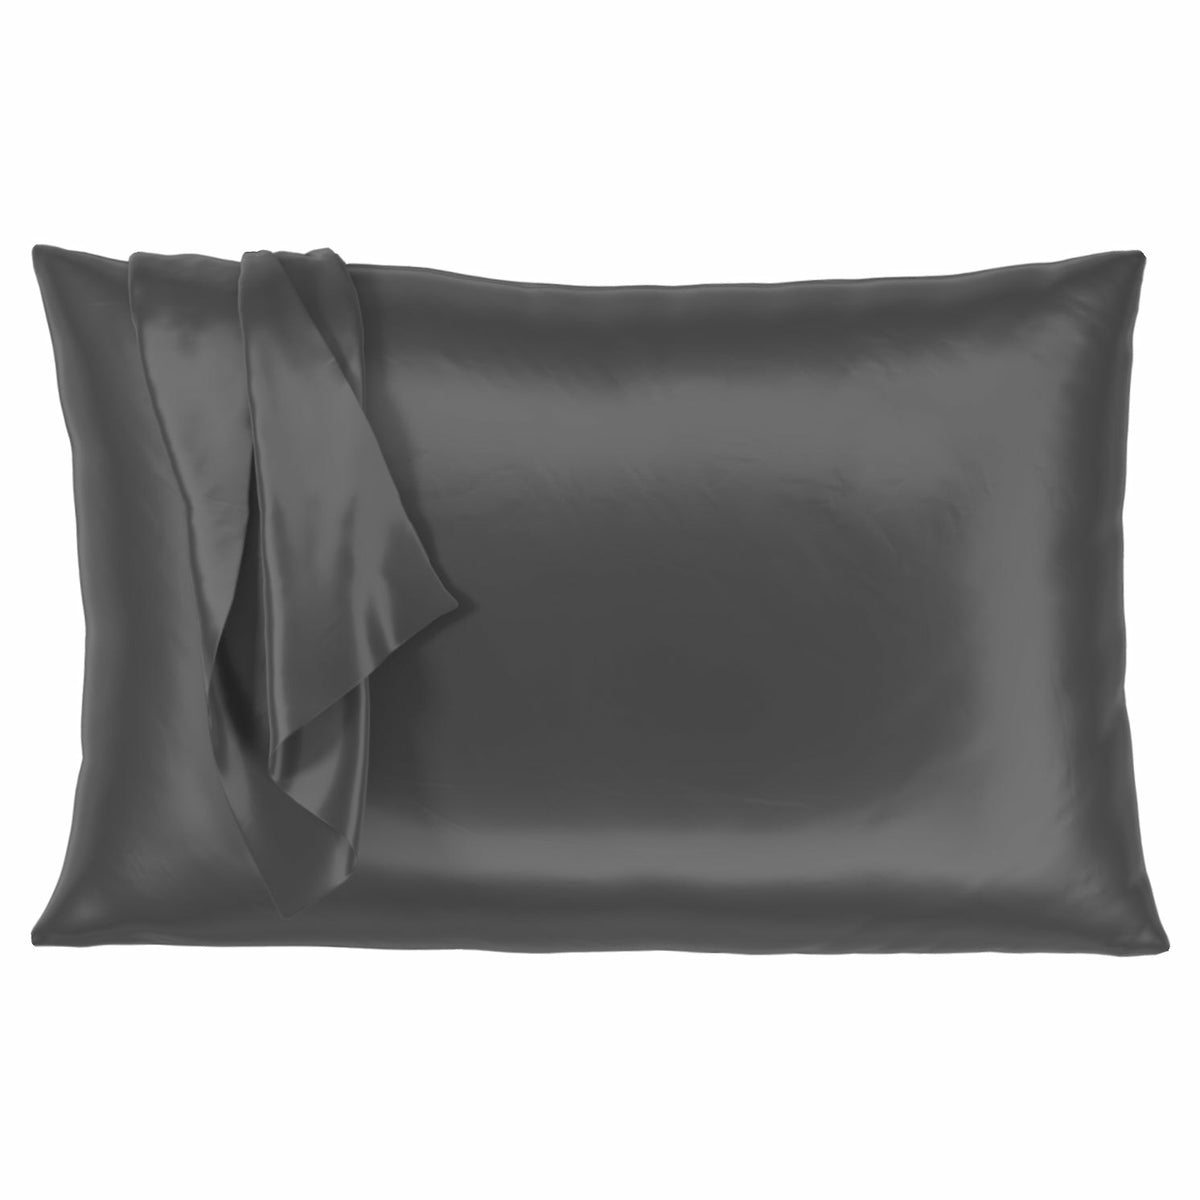 Mulberry Silk Pillowcase for Hair and Skin Standard Size 20X 26 Pillow  Case wi